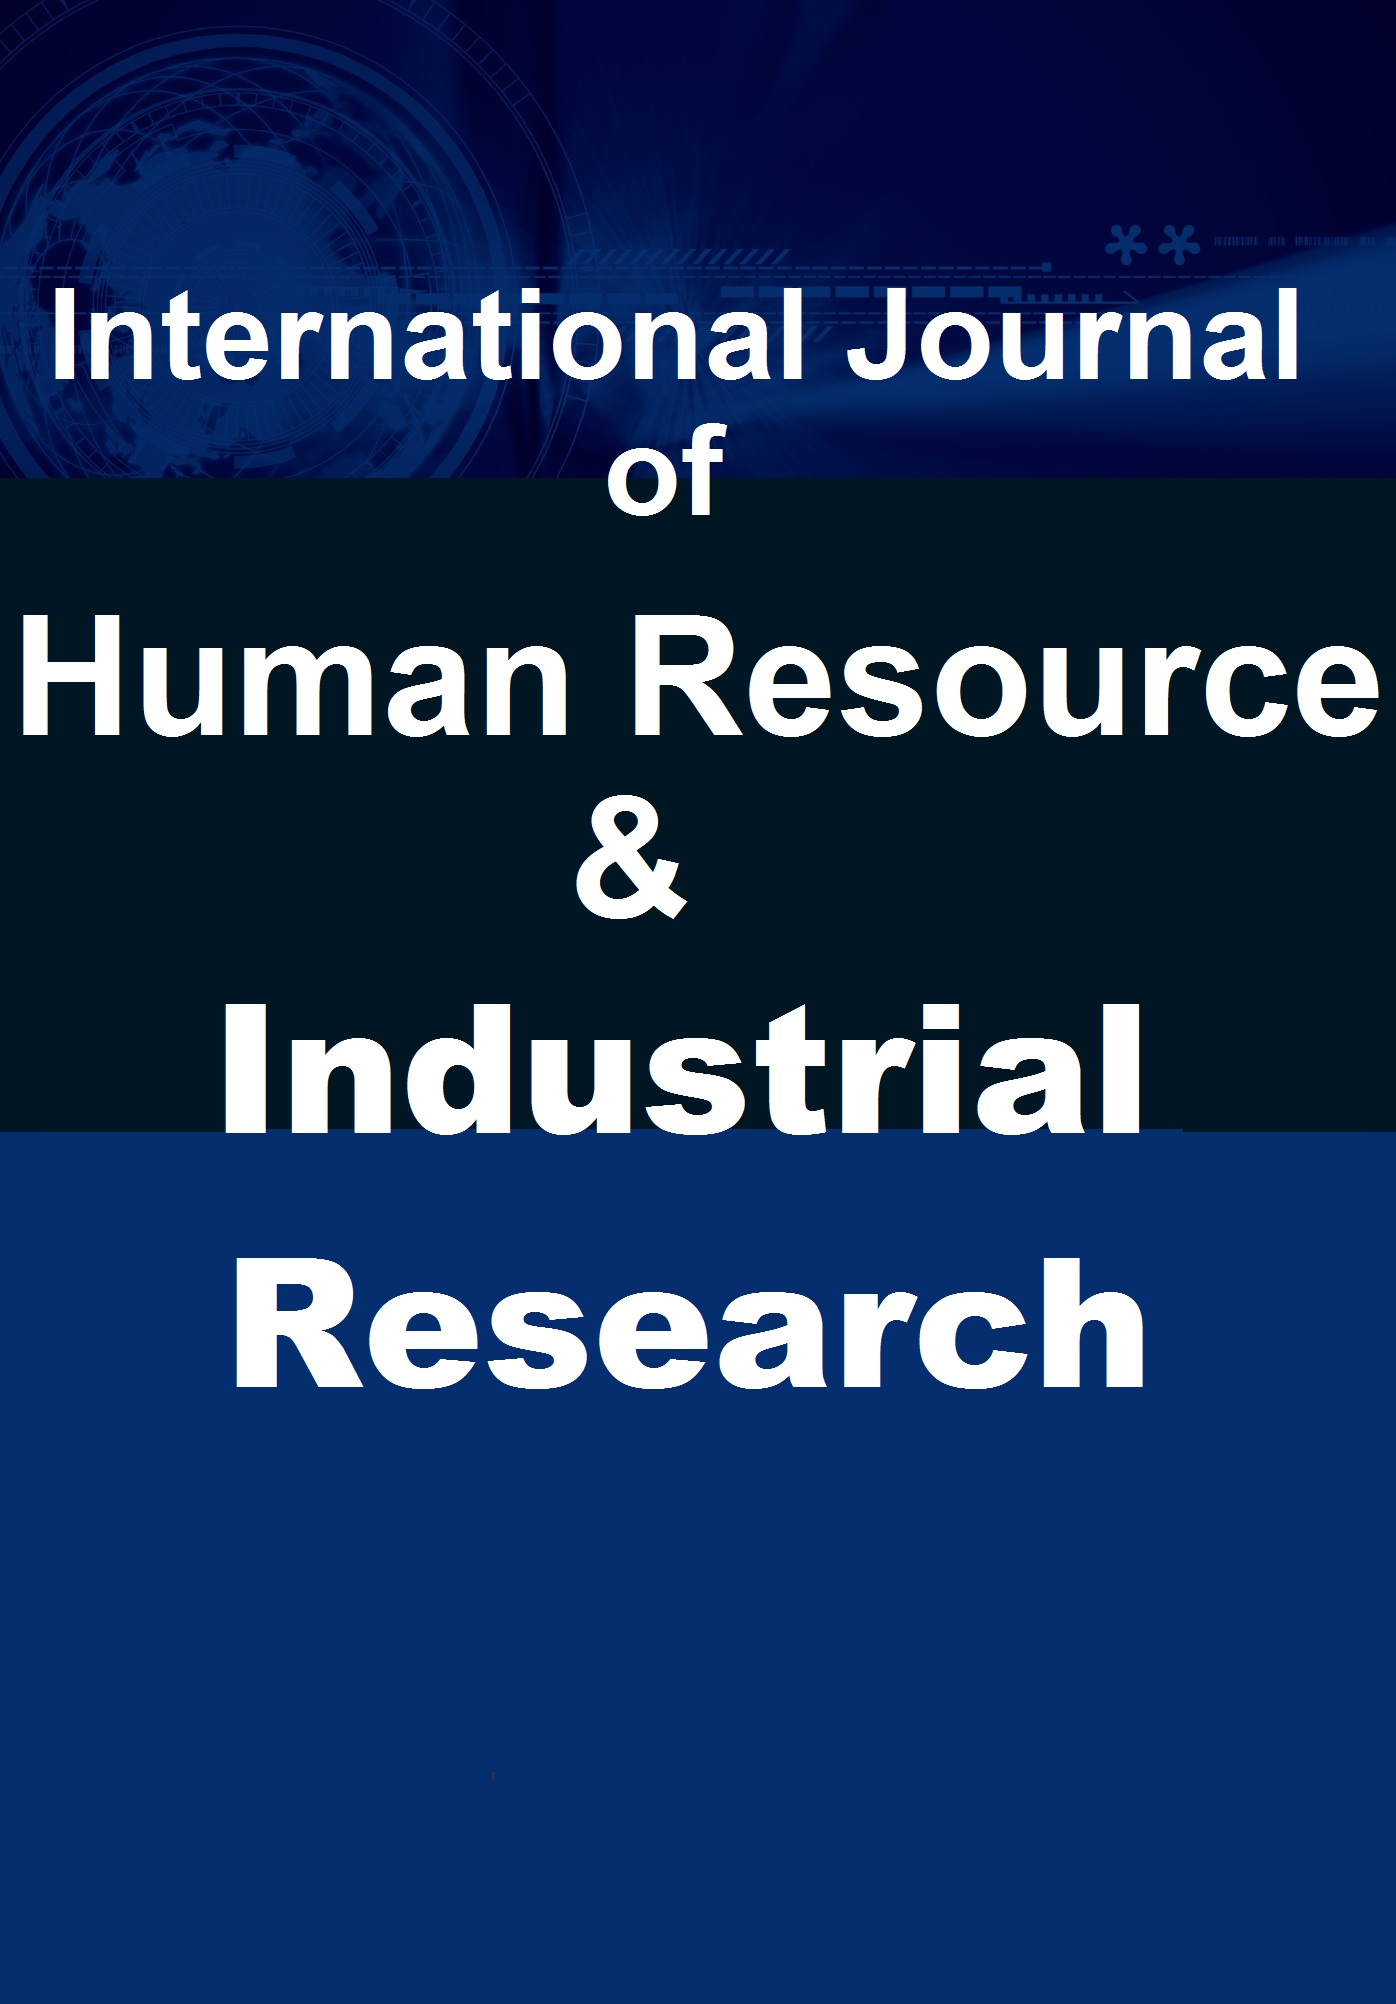 International Journal of Human Resource & Industrial Research